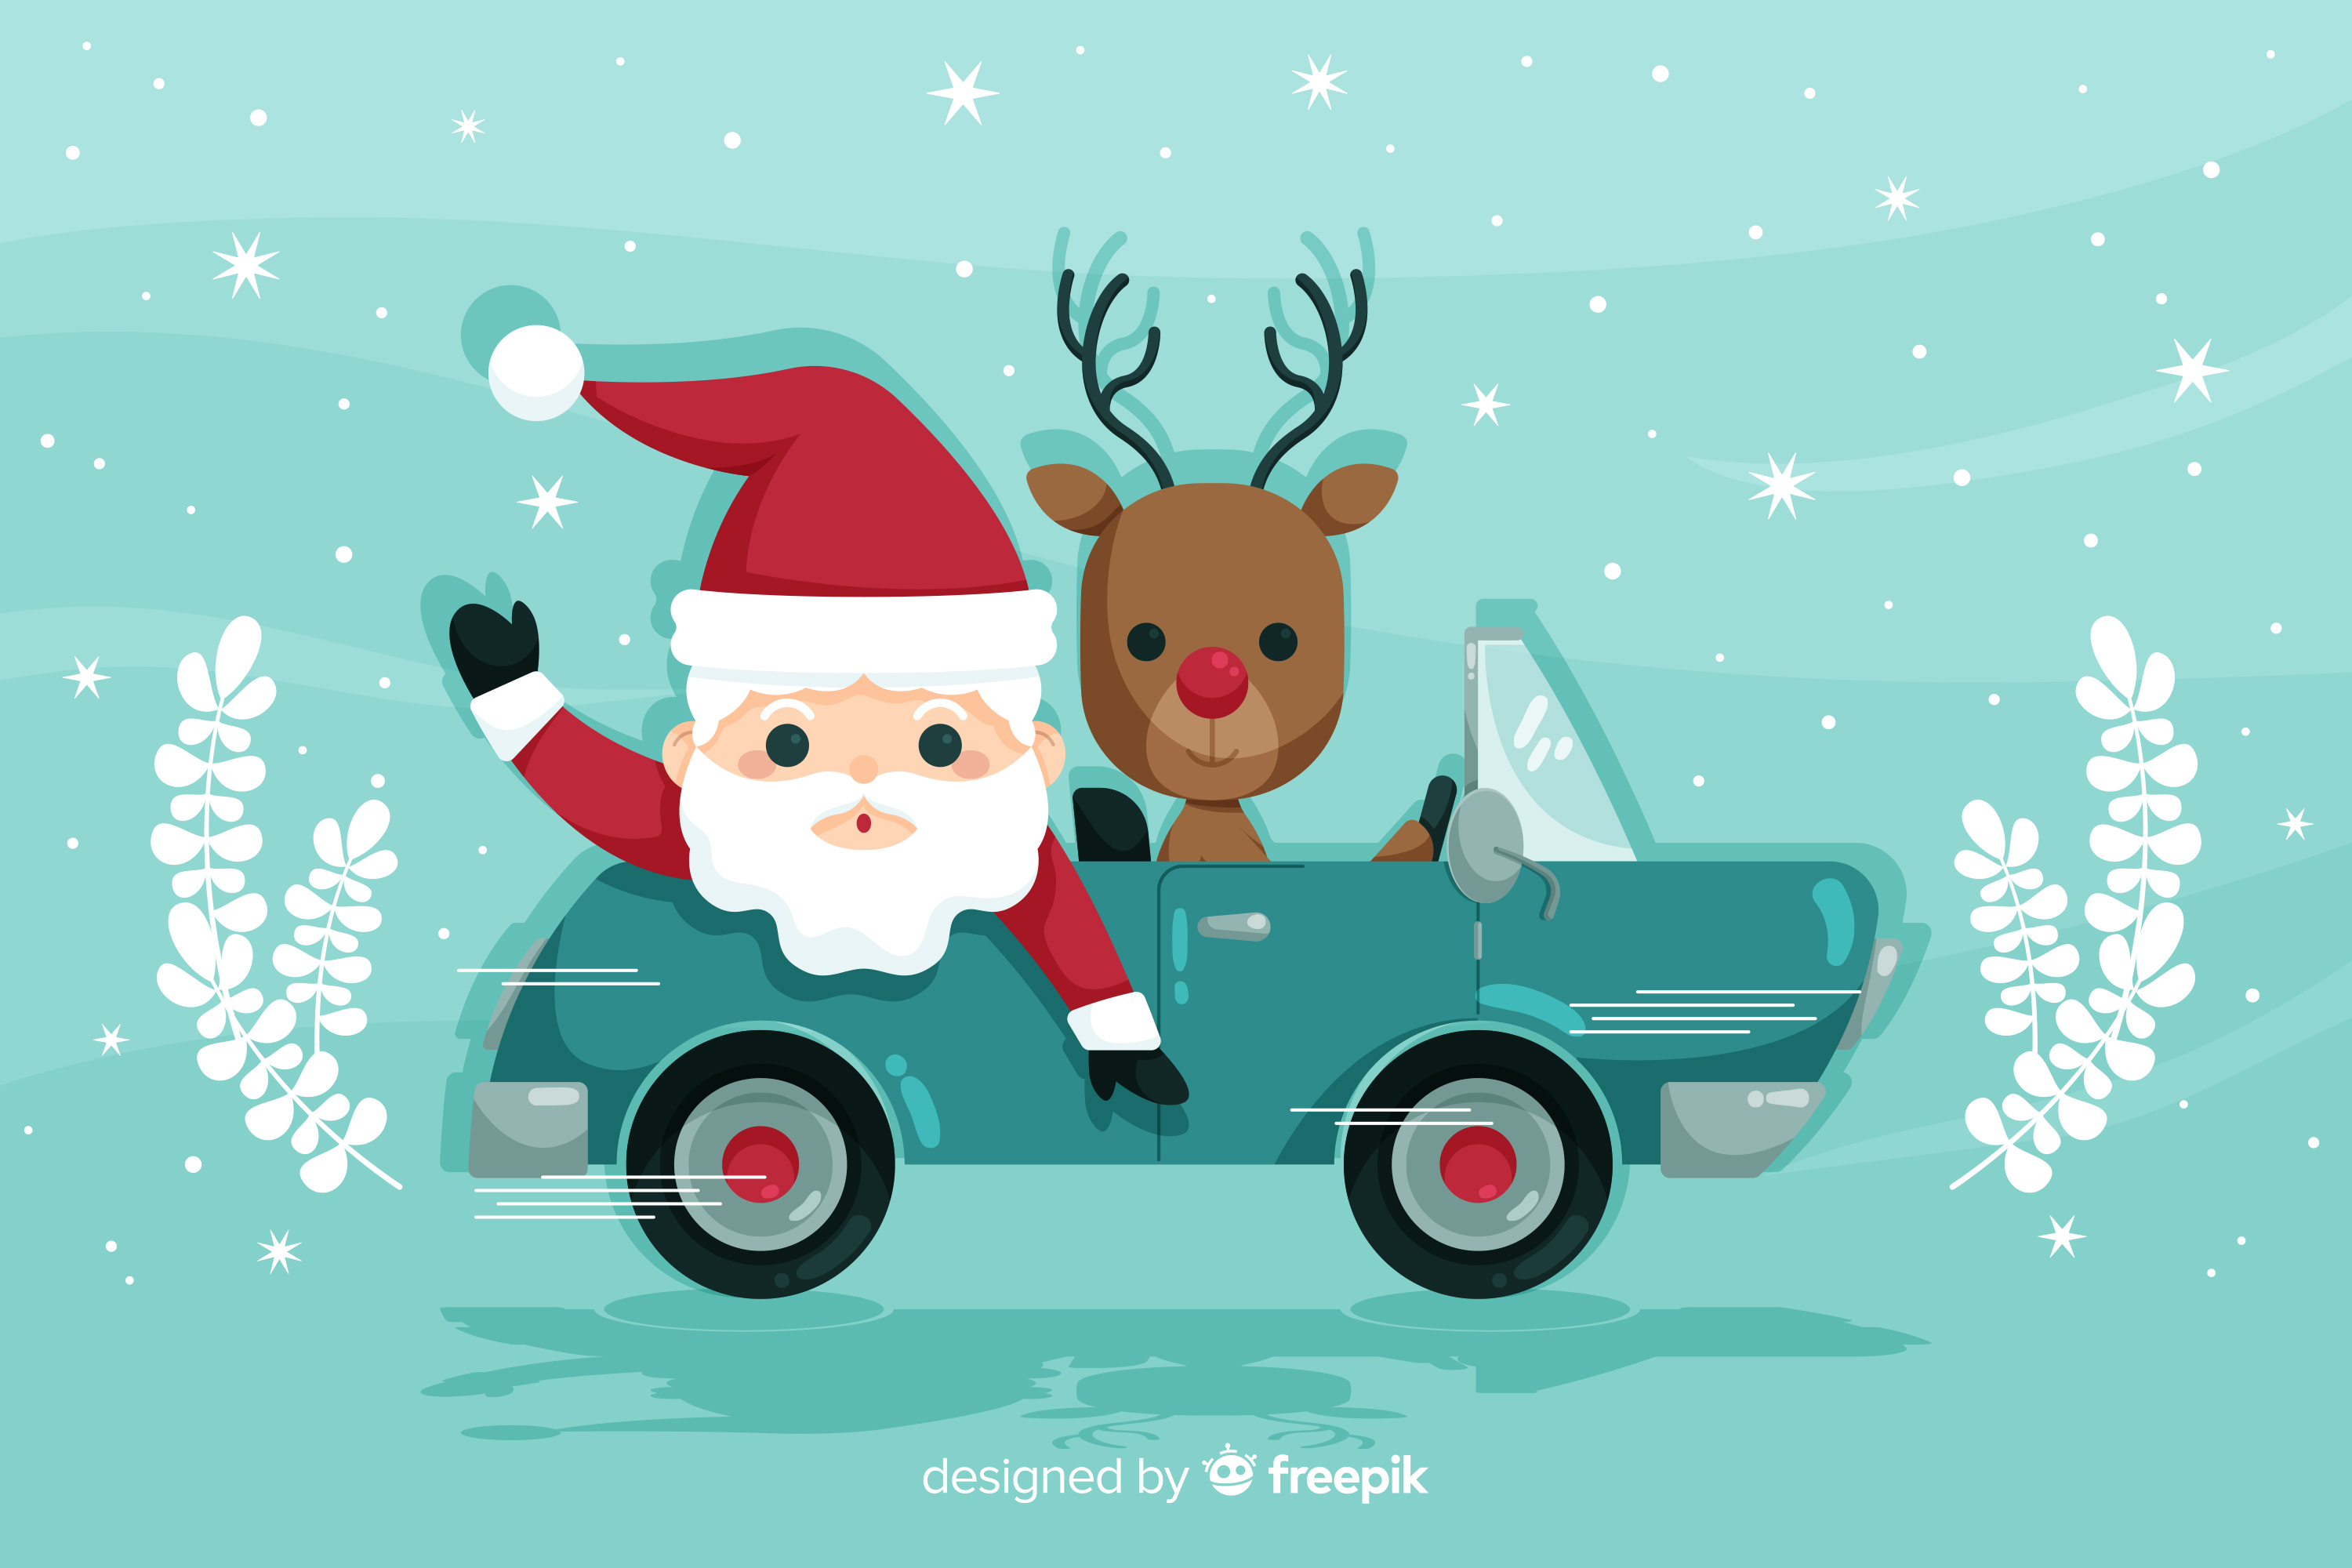 Santa Claus in a convertible with Rudolph illustration.